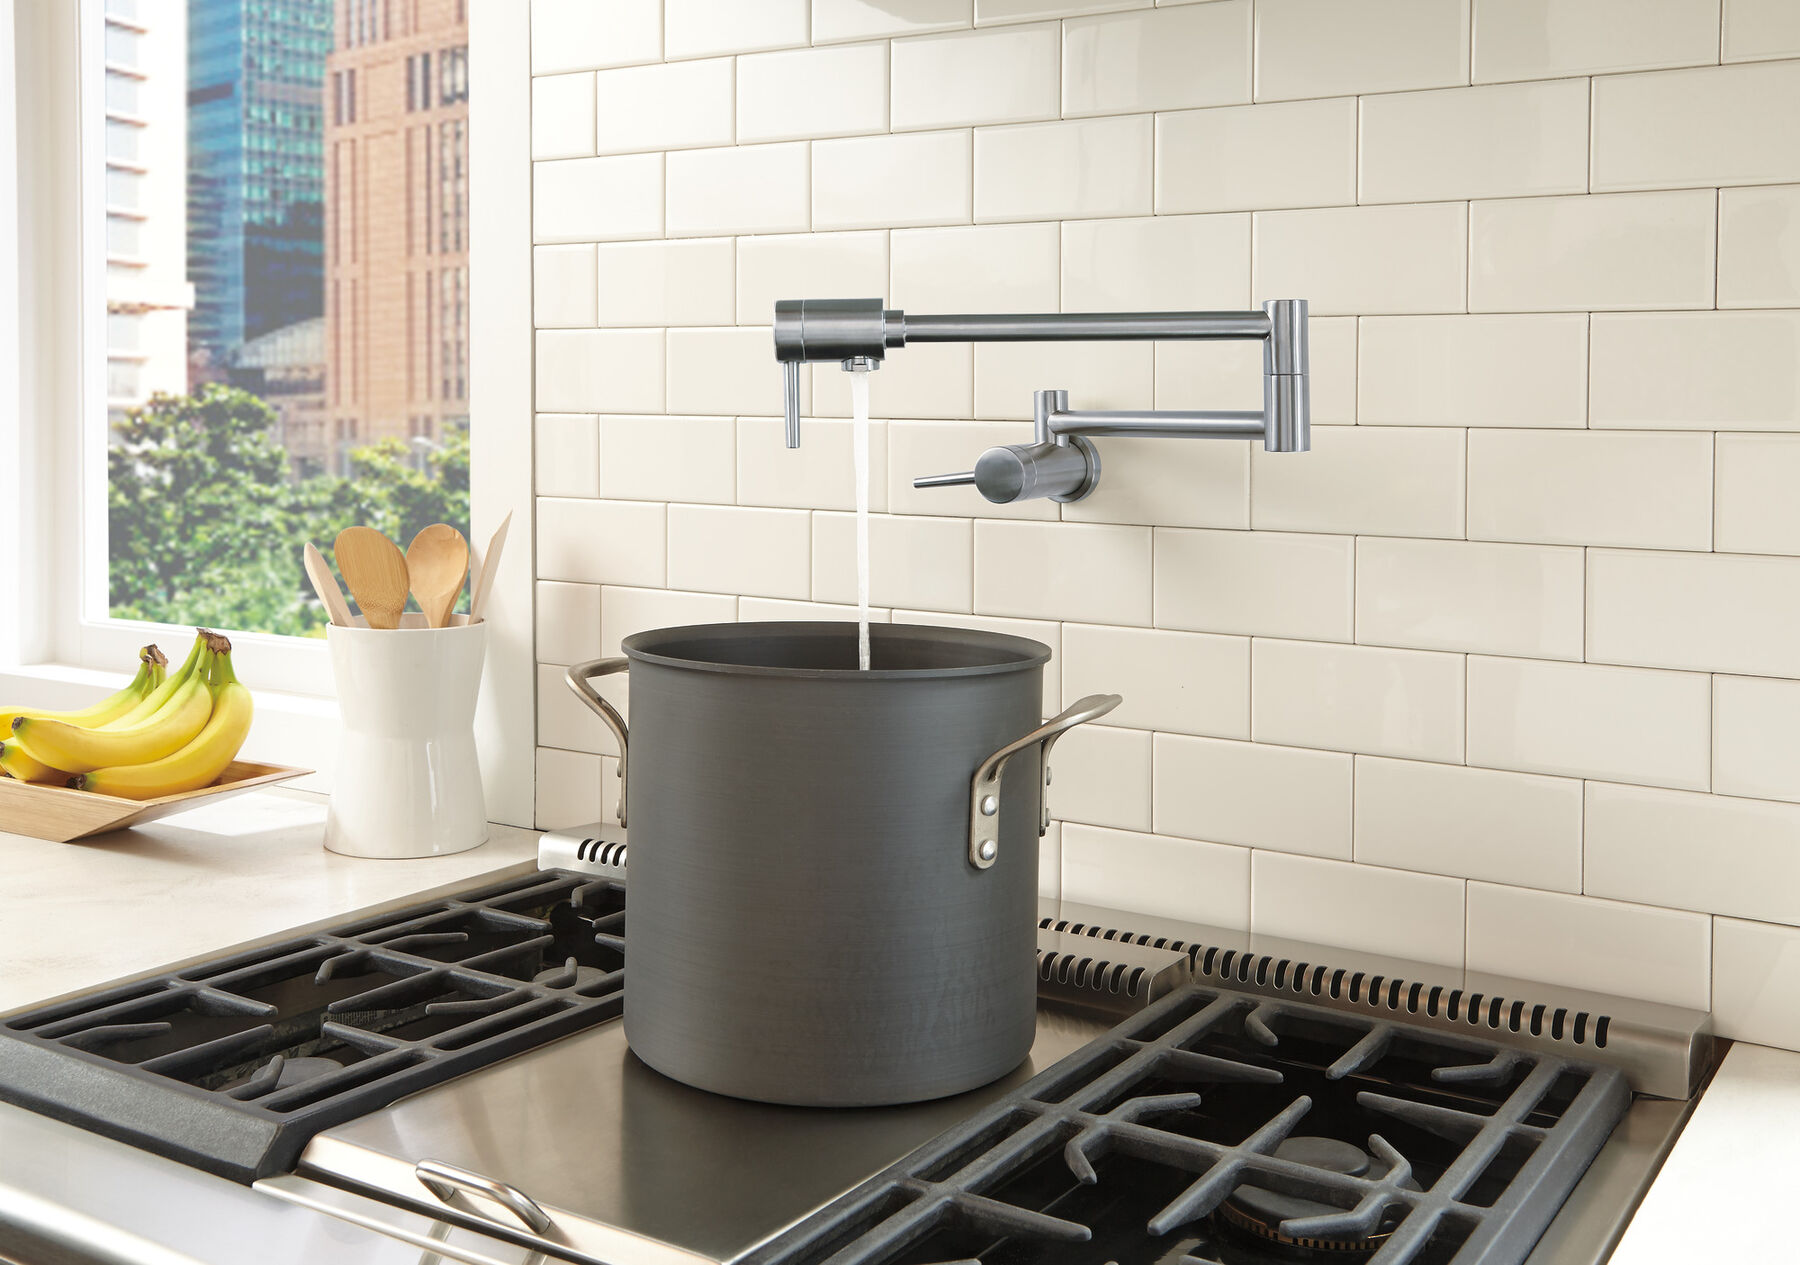 What Is an Above the Stove Pot Filler?